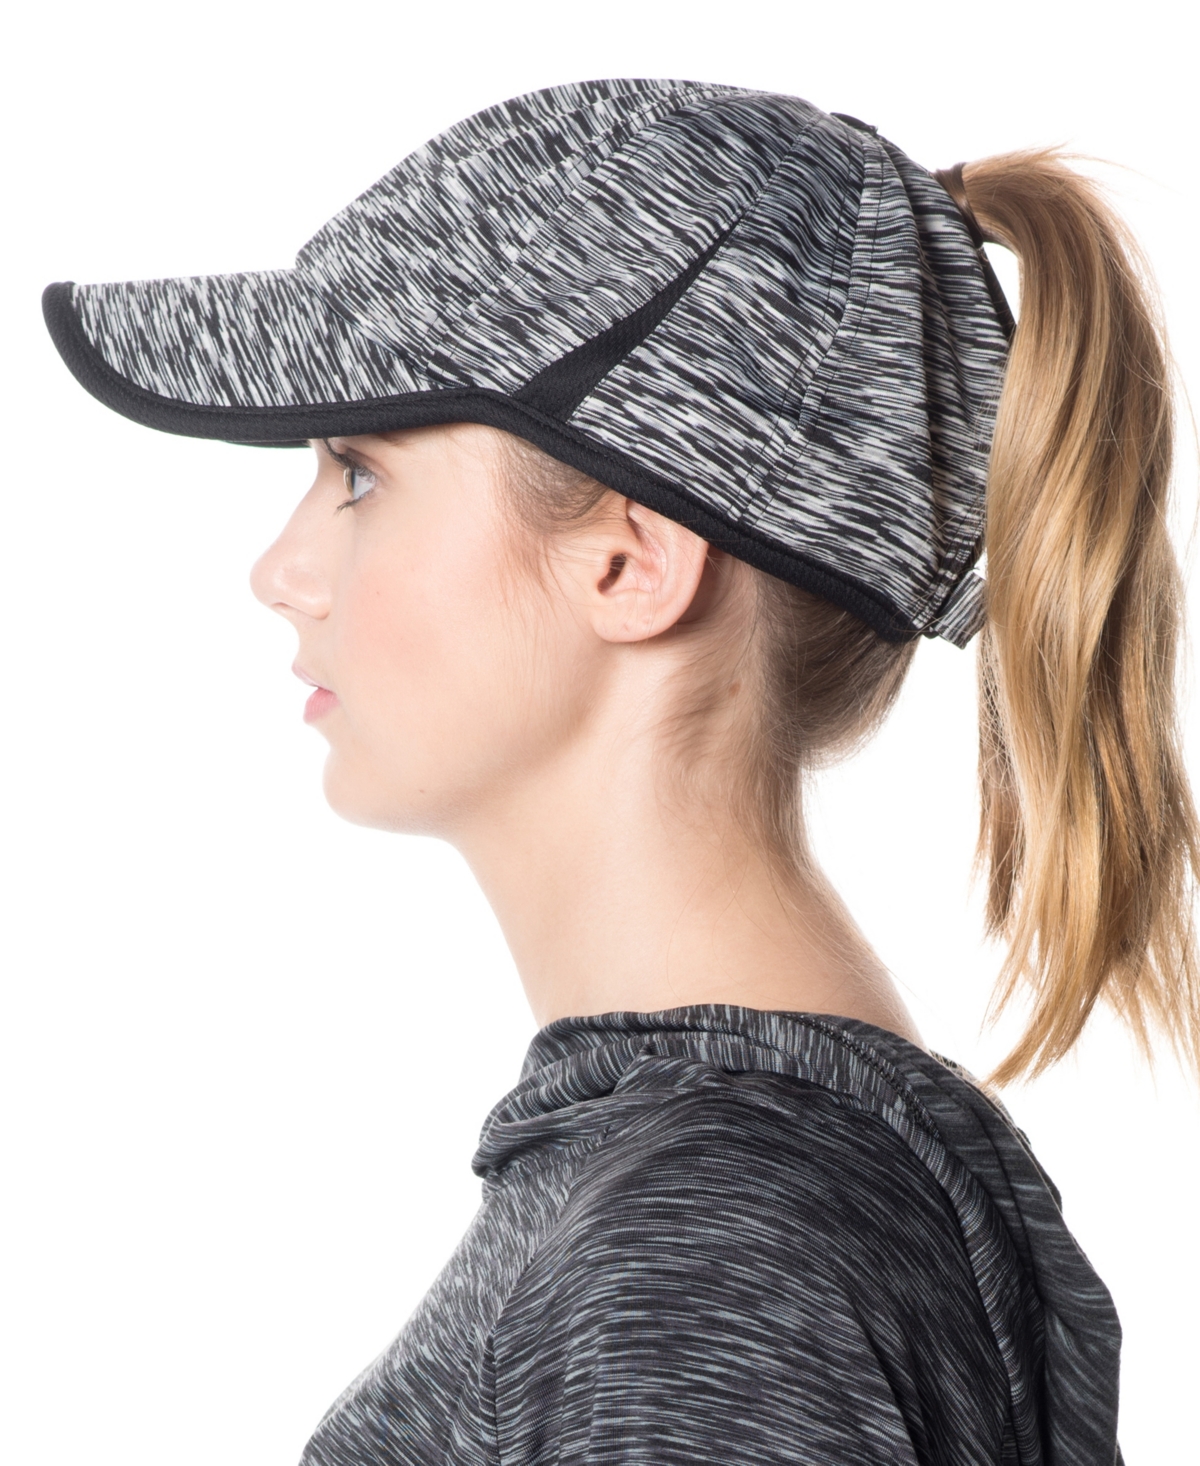 Shop Angela & William Women's Ponytail Messy Buns Yoga Ponycap With Zipper Opening In Black